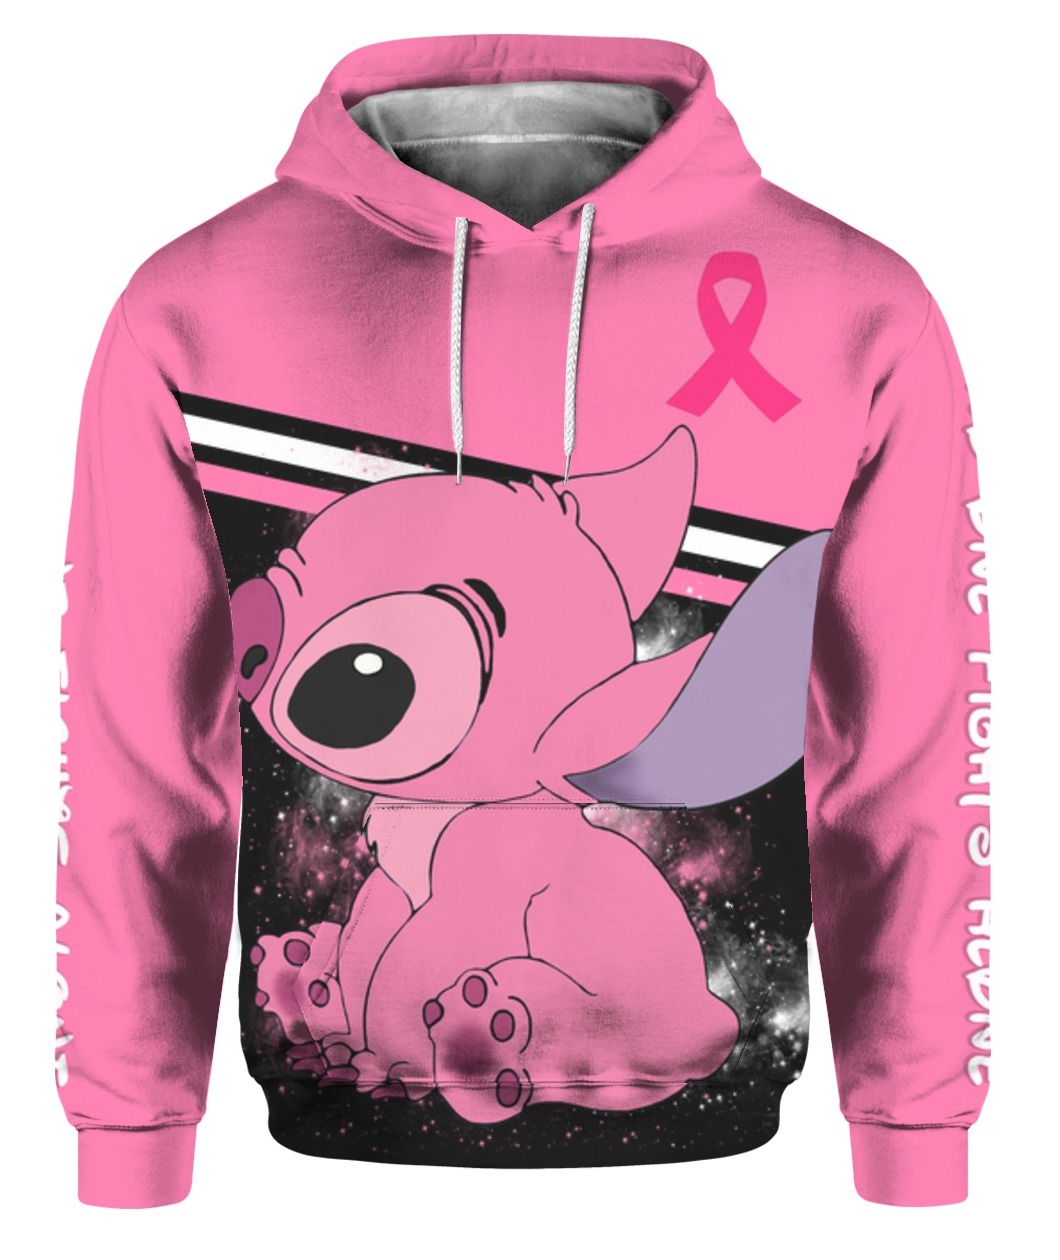 Cancer Awareness Stitch ohana means family 3d hoodie - LIMITED EDITION BBS